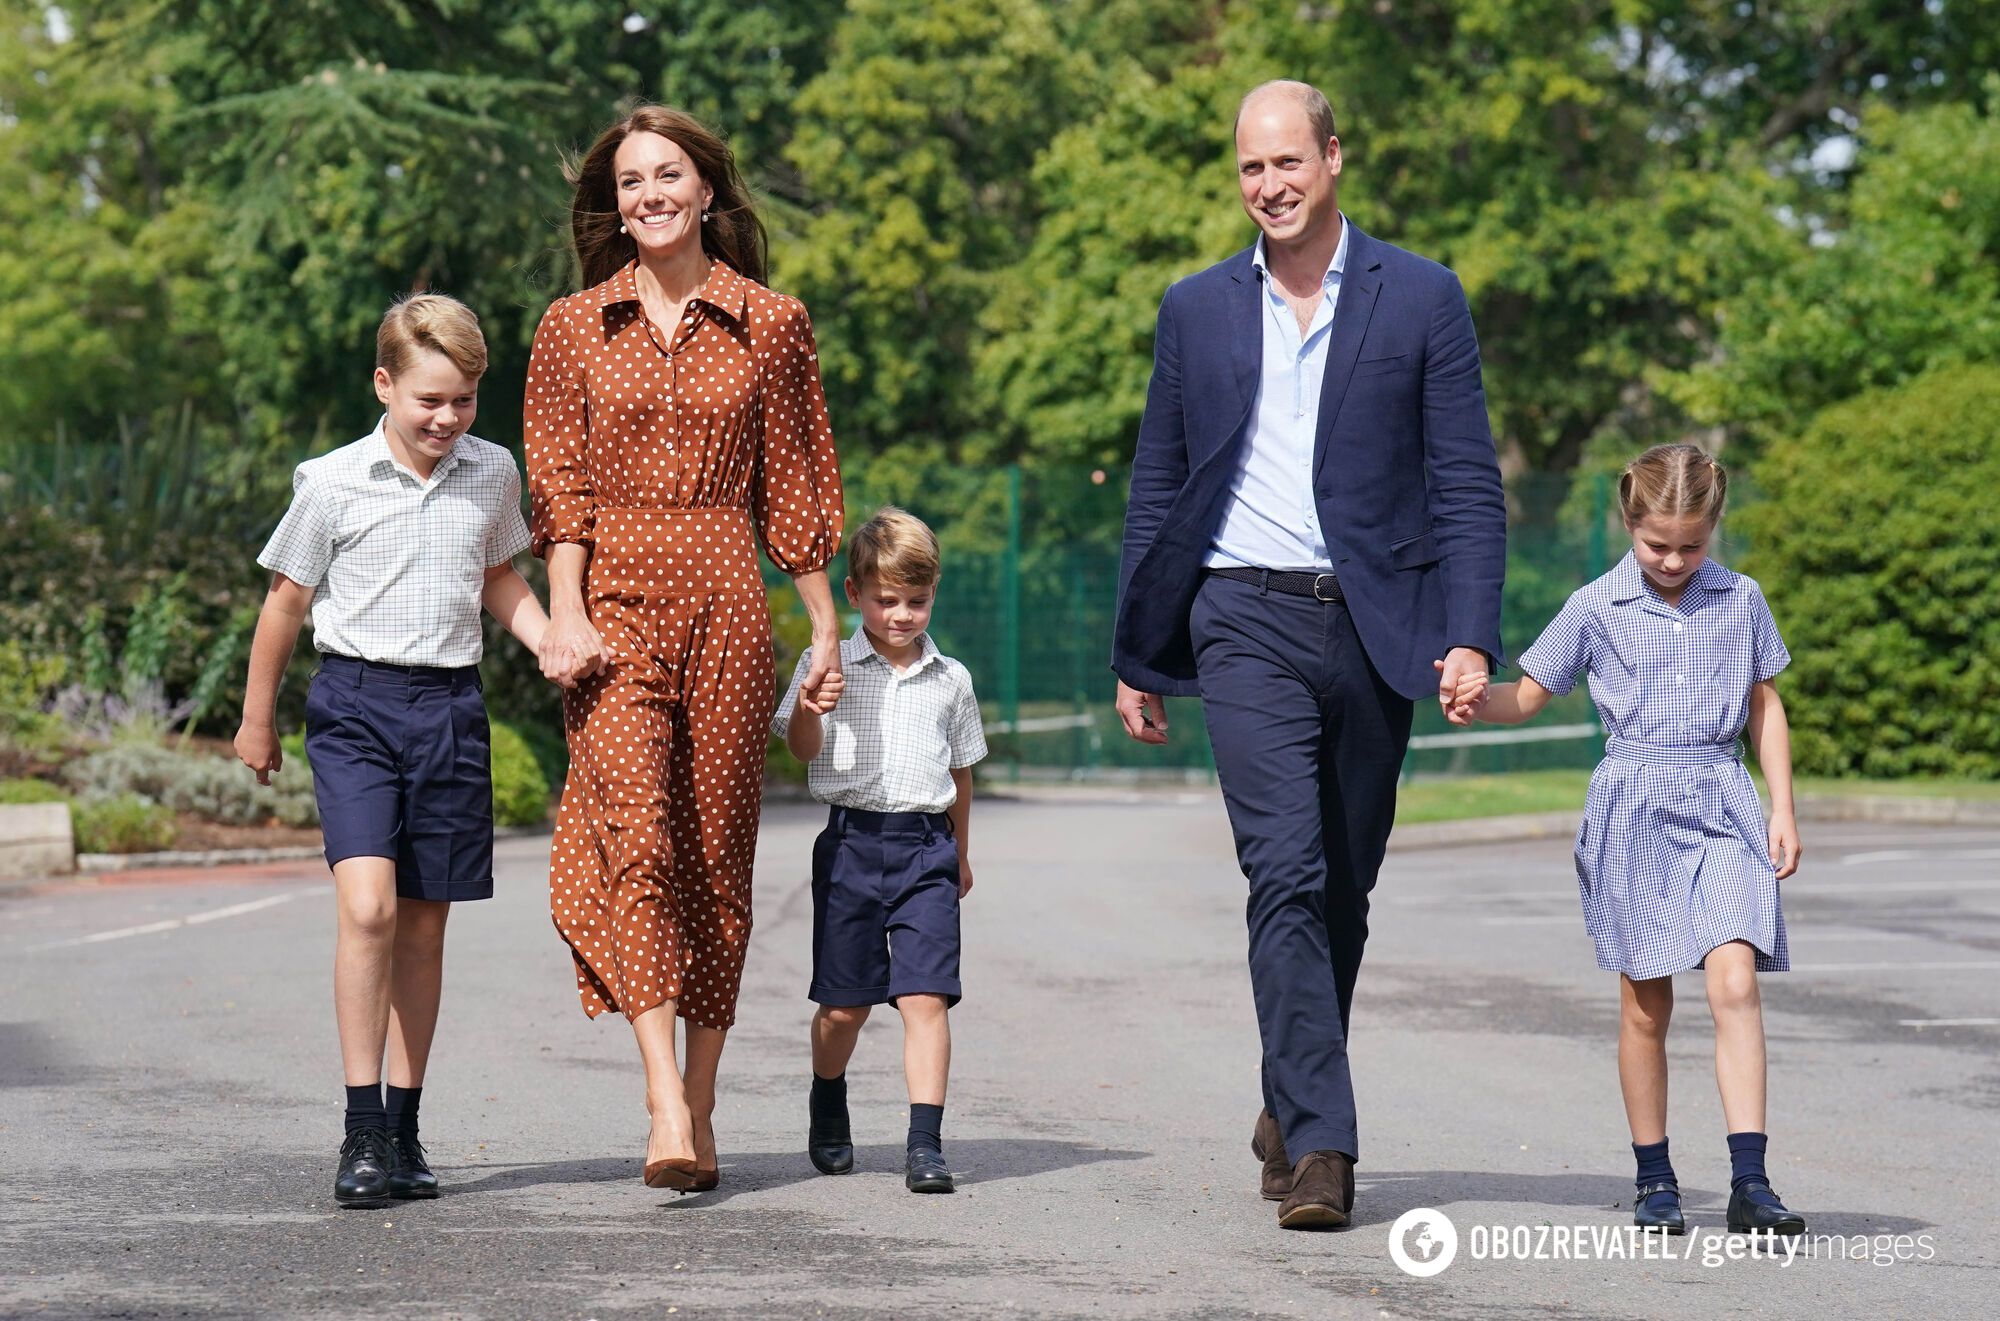 The scandal surrounding Kate Middleton's photoshopped photo has continued: metadata of the same photo with children has been posted online